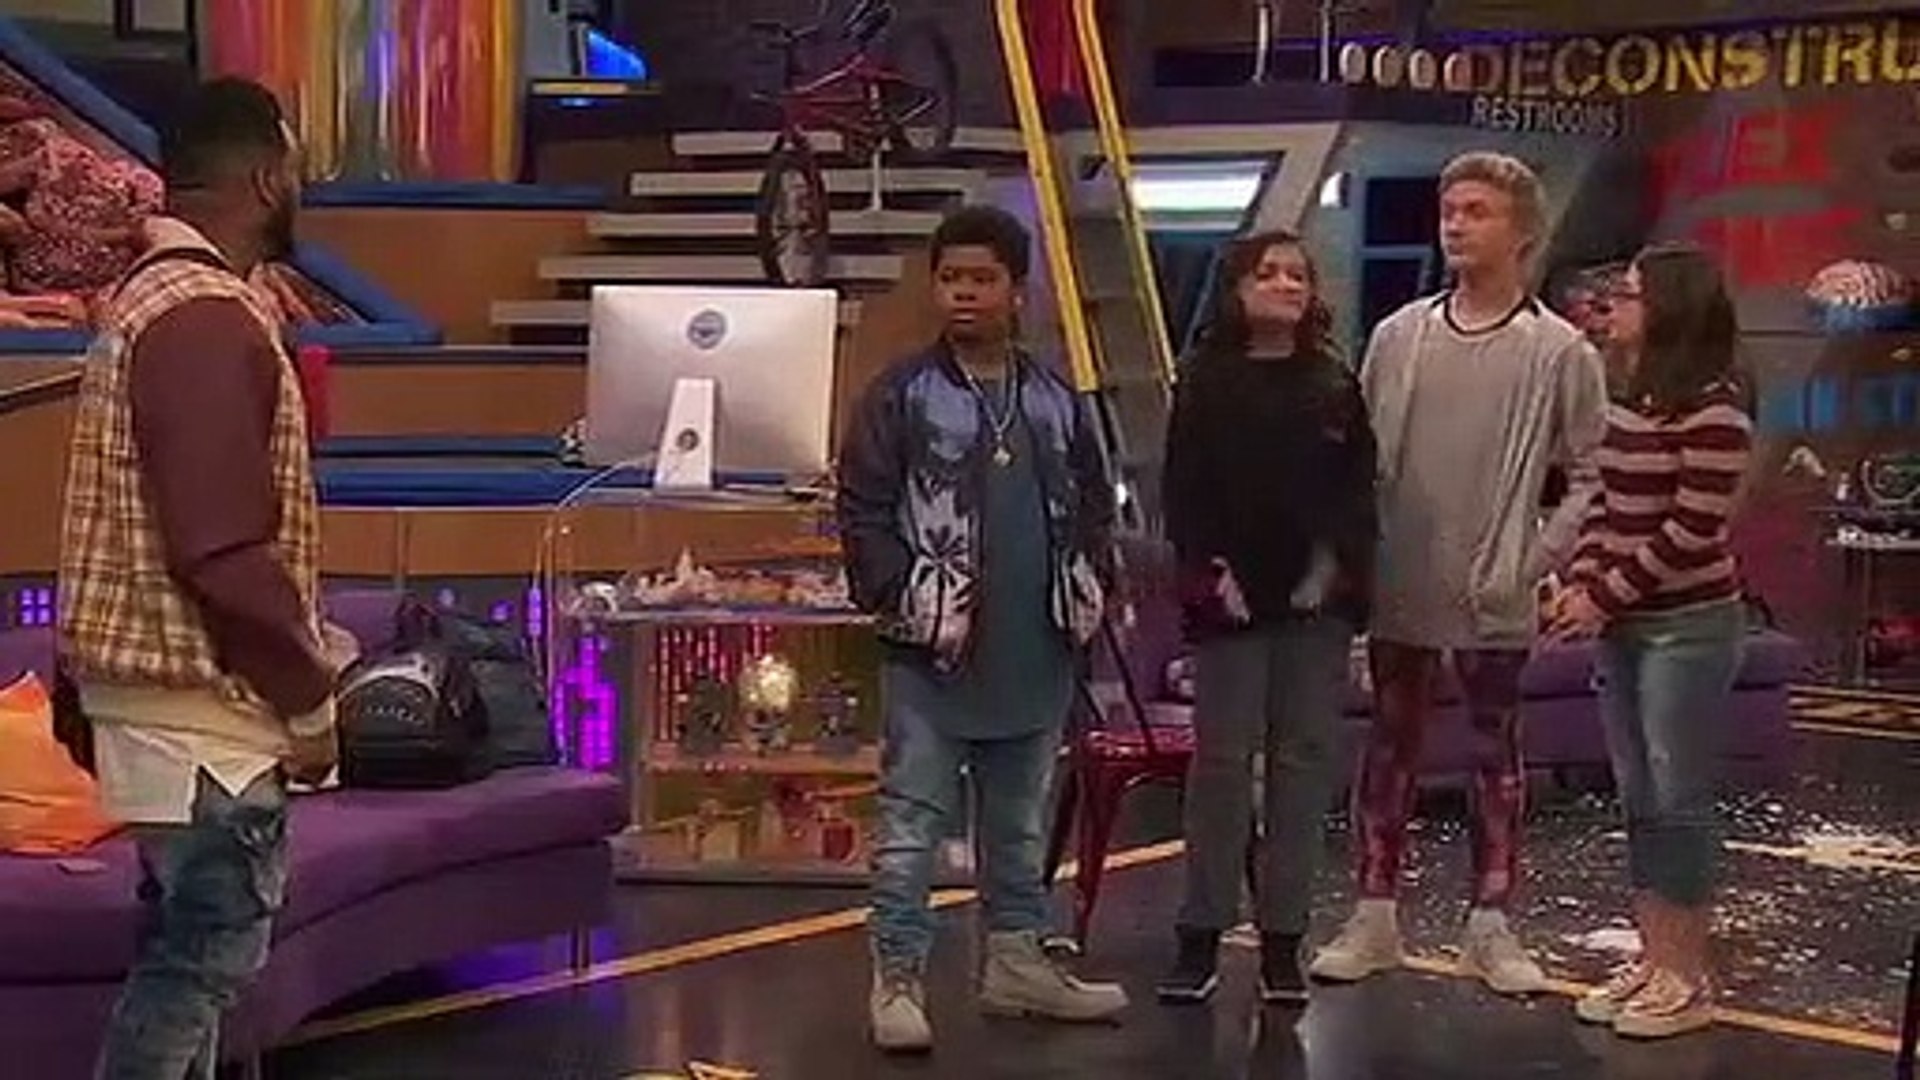 Watch Game Shakers